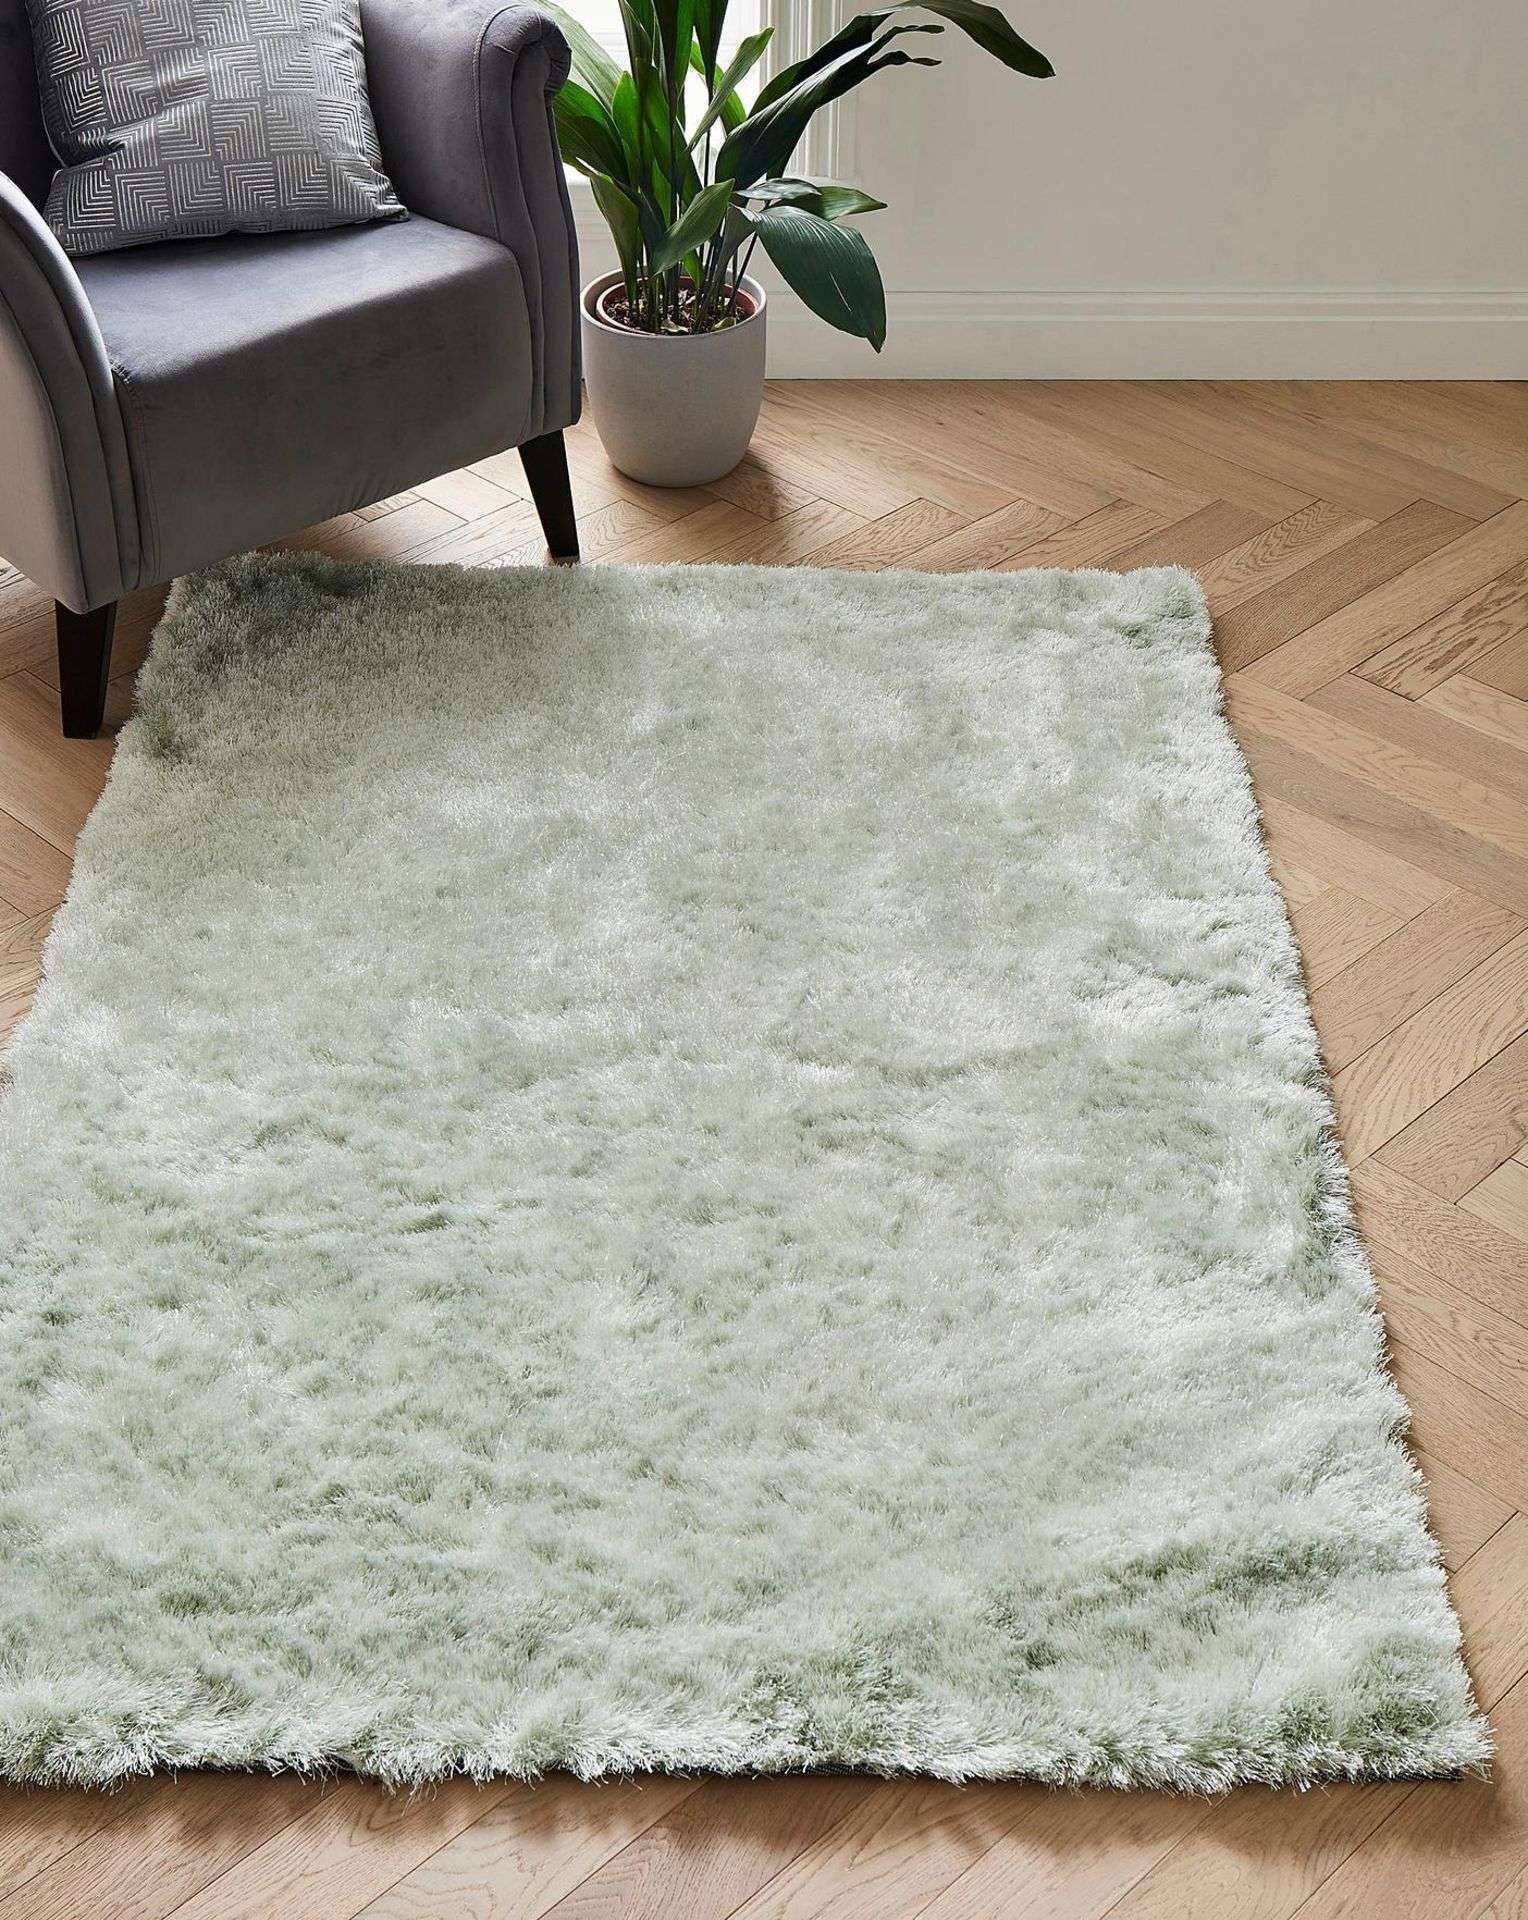 3x BRAND NEW Shimmer Cozy Shaggy Rug 80CM X 150CM. BLUSH. RRP £62 EACH. Add a touch of glamour to